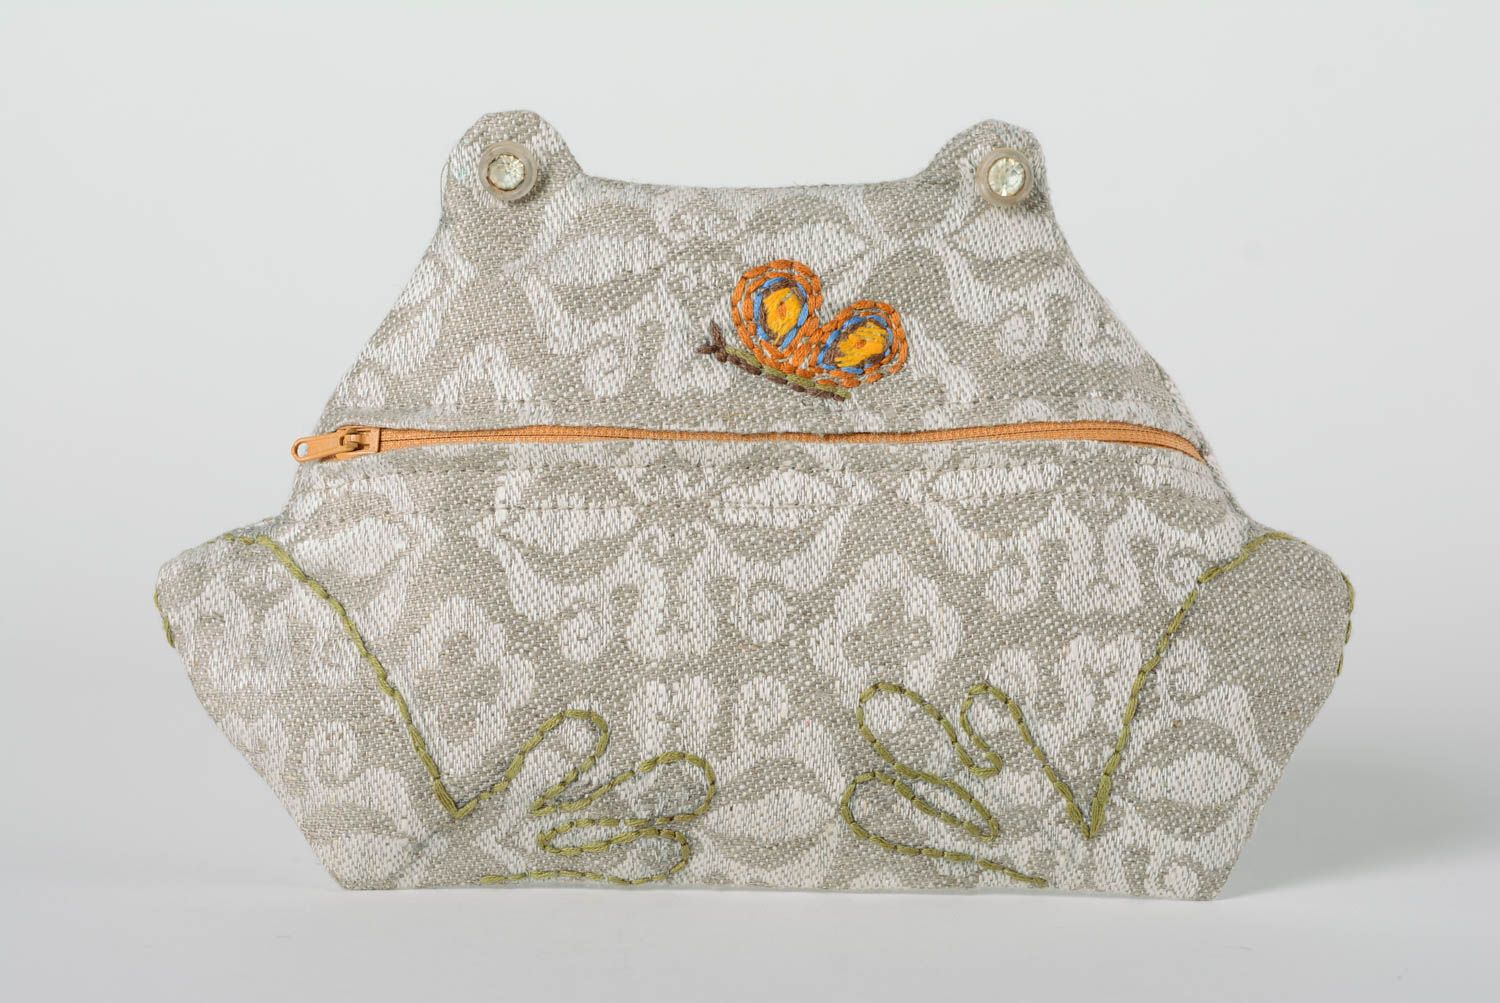 Handmade cosmetic bag sewn of linen in the shape of frog with zipper fastener photo 1